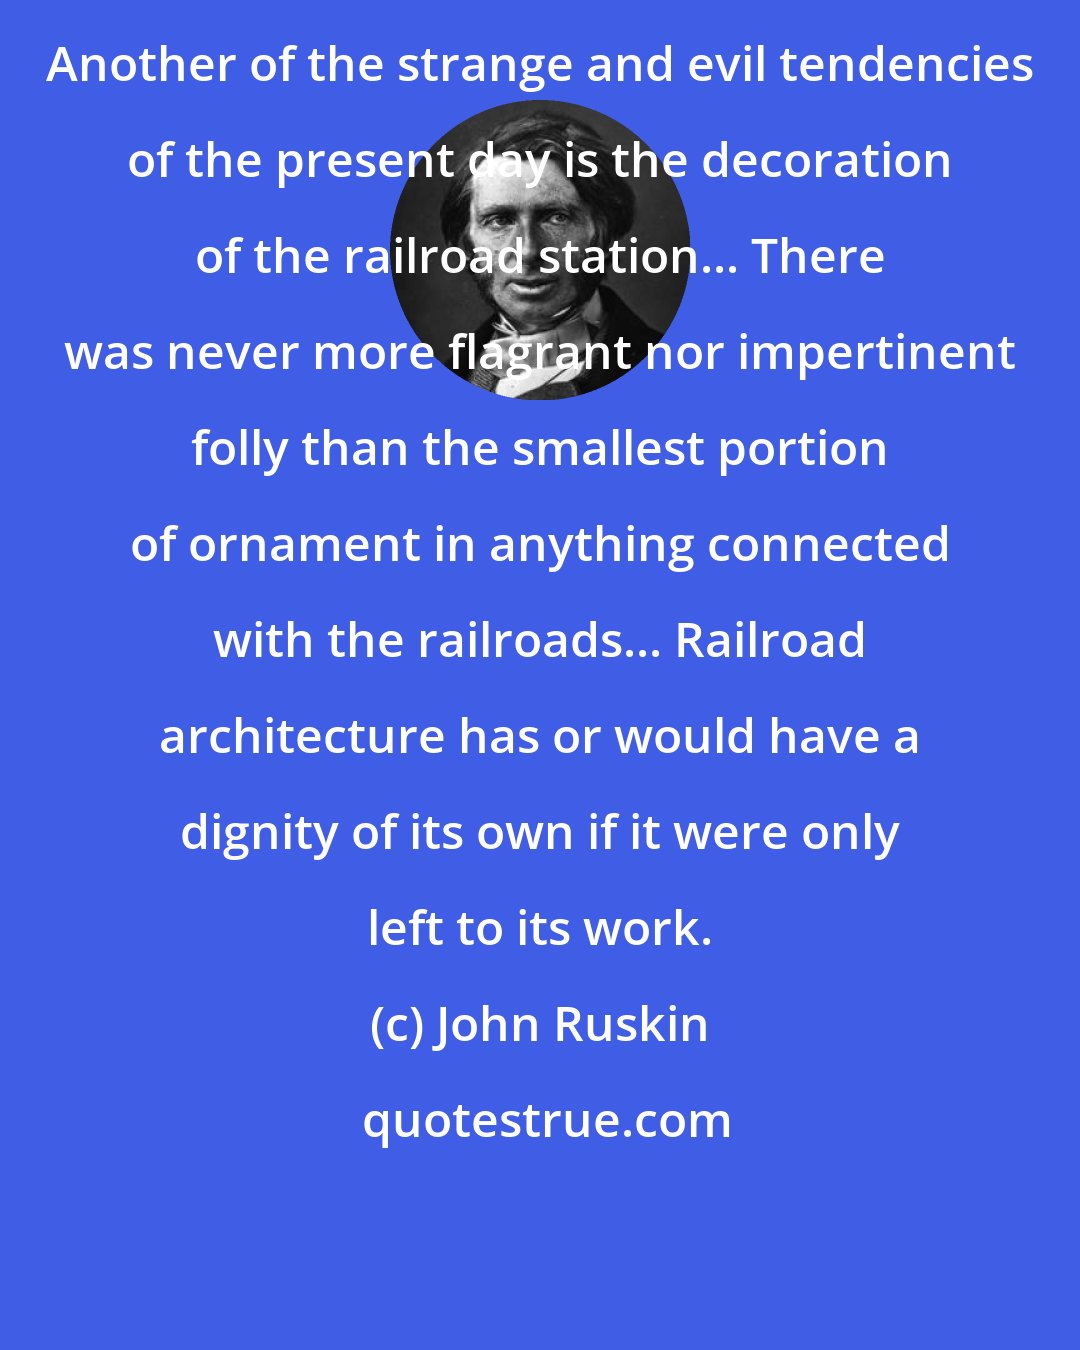 John Ruskin: Another of the strange and evil tendencies of the present day is the decoration of the railroad station... There was never more flagrant nor impertinent folly than the smallest portion of ornament in anything connected with the railroads... Railroad architecture has or would have a dignity of its own if it were only left to its work.